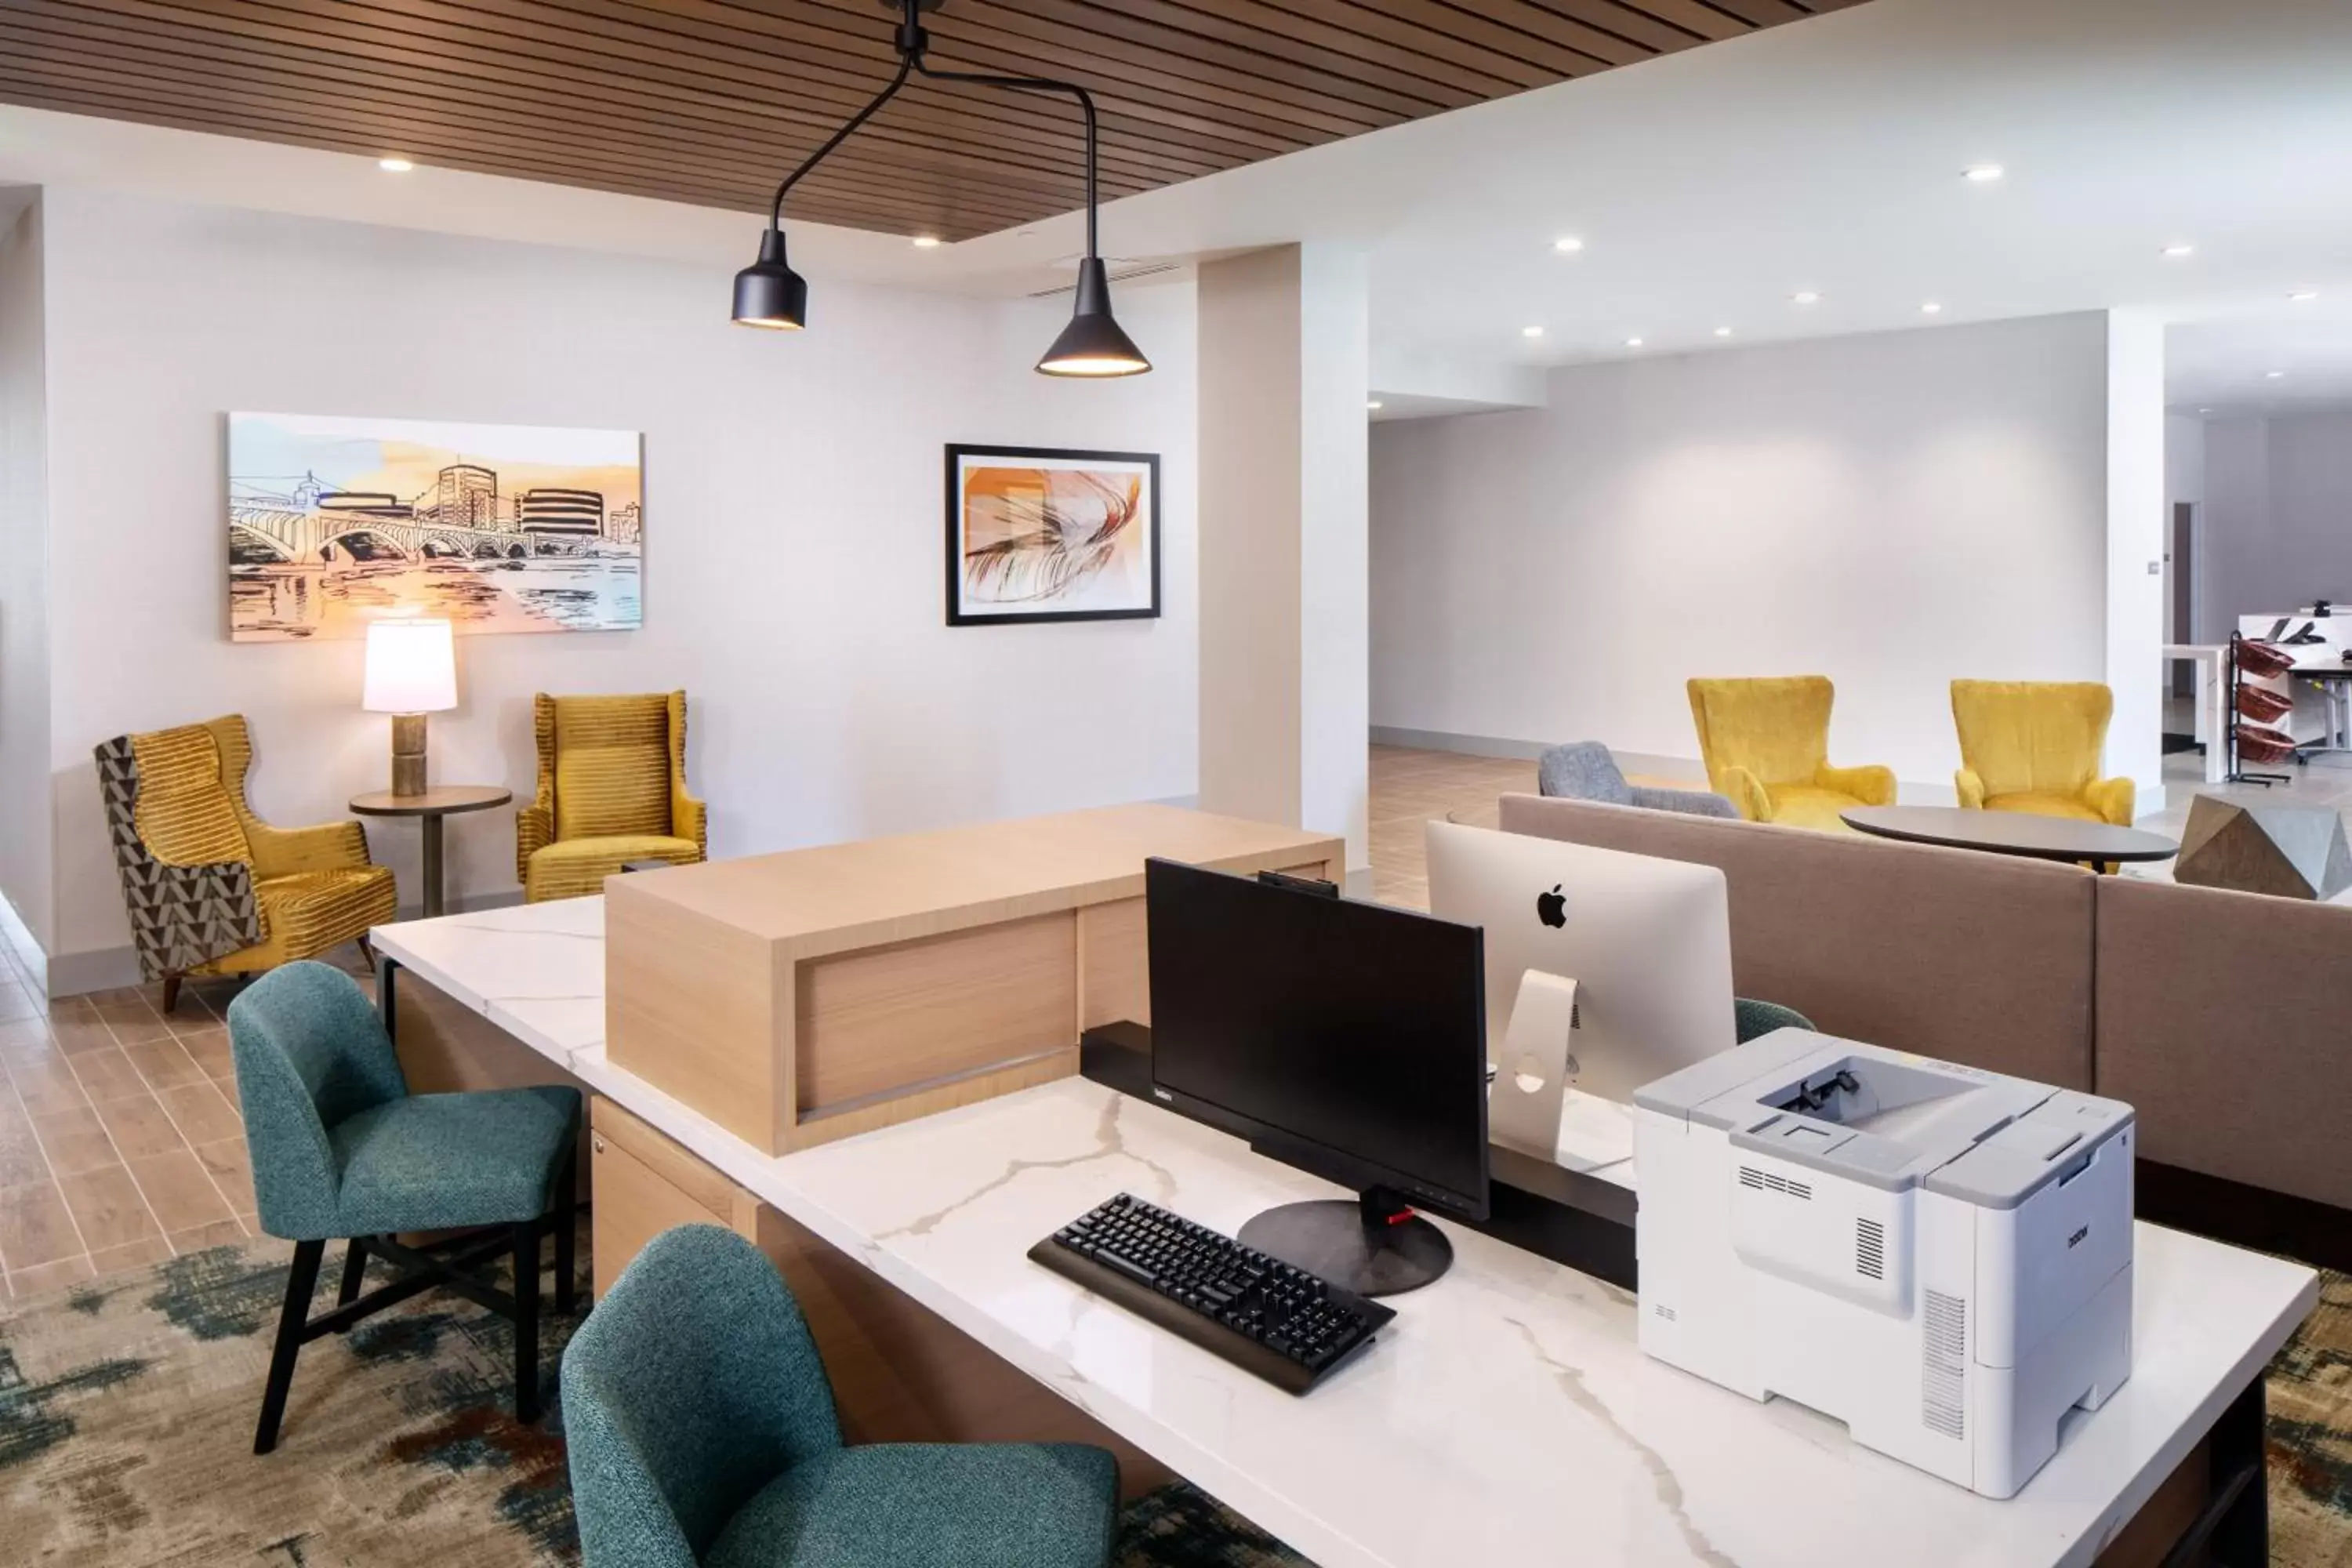 Business facilities in Hyatt Place Scottsdale North